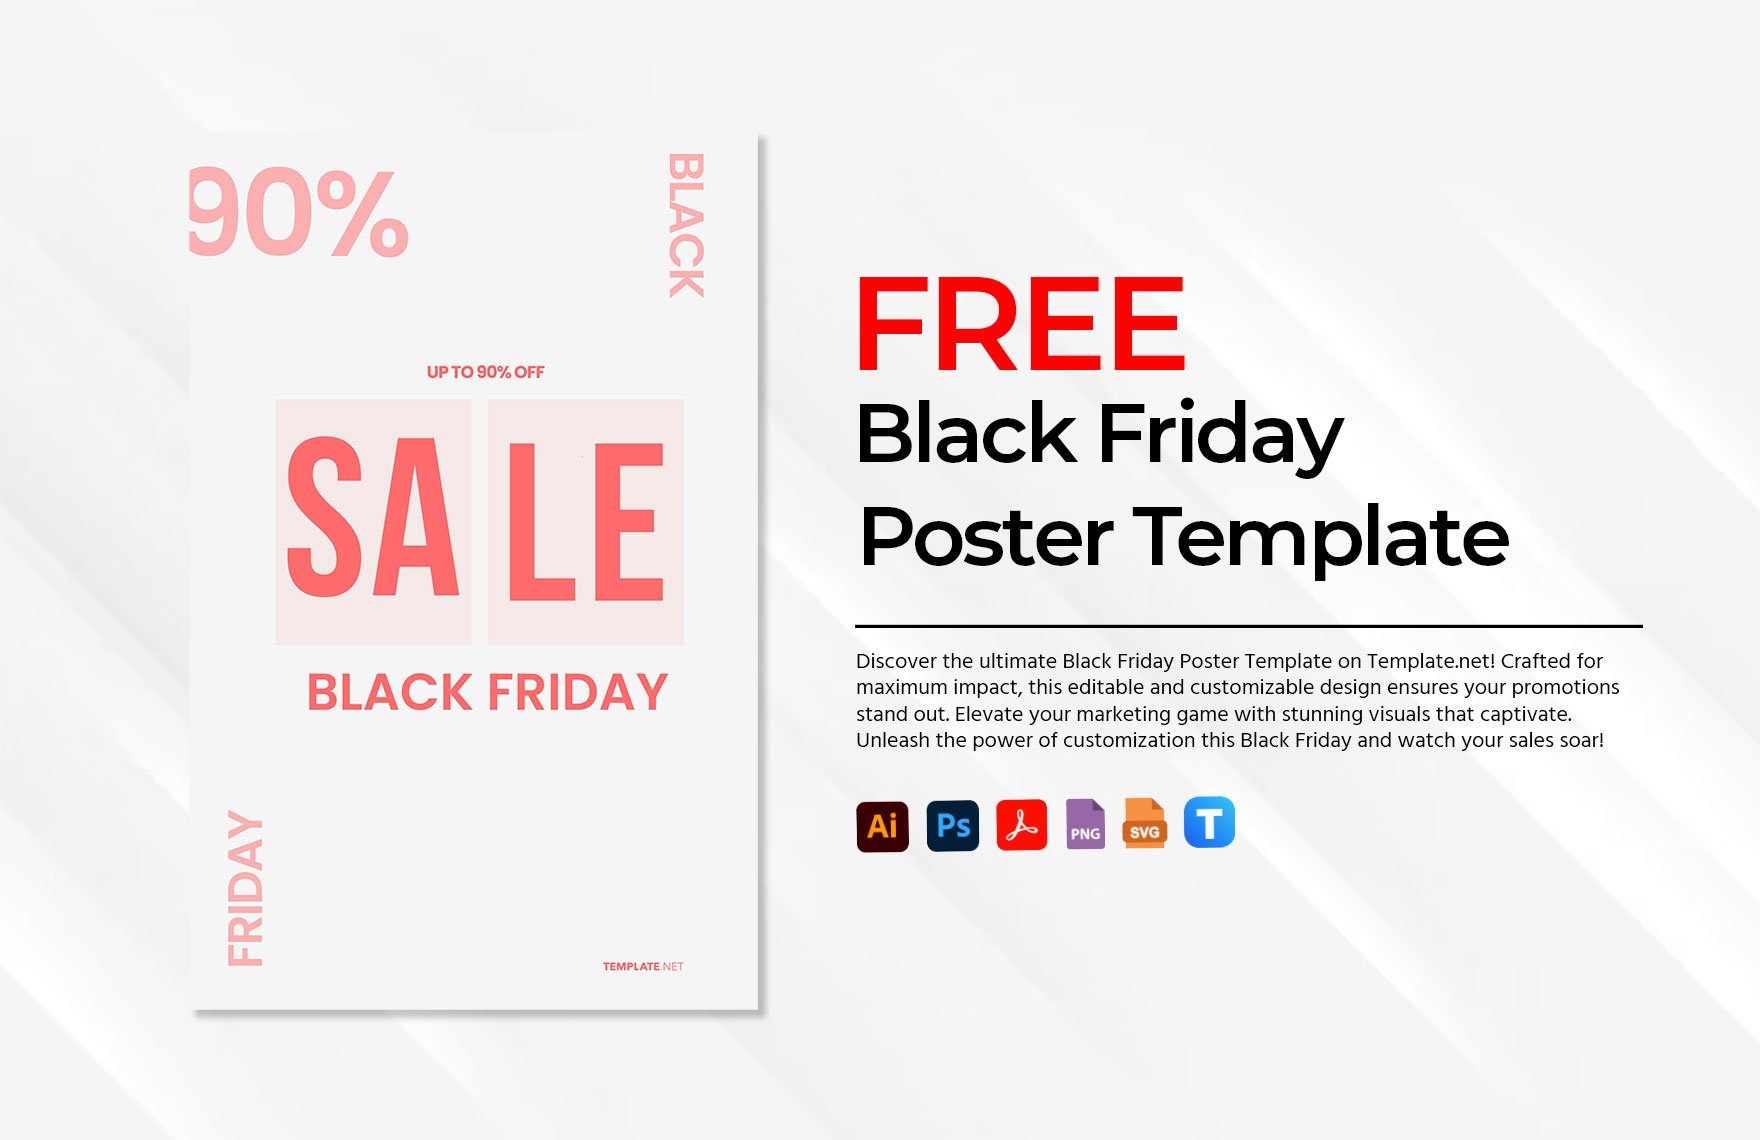 Free Black Friday Poster Template in PDF, Illustrator, PSD, SVG, PNG